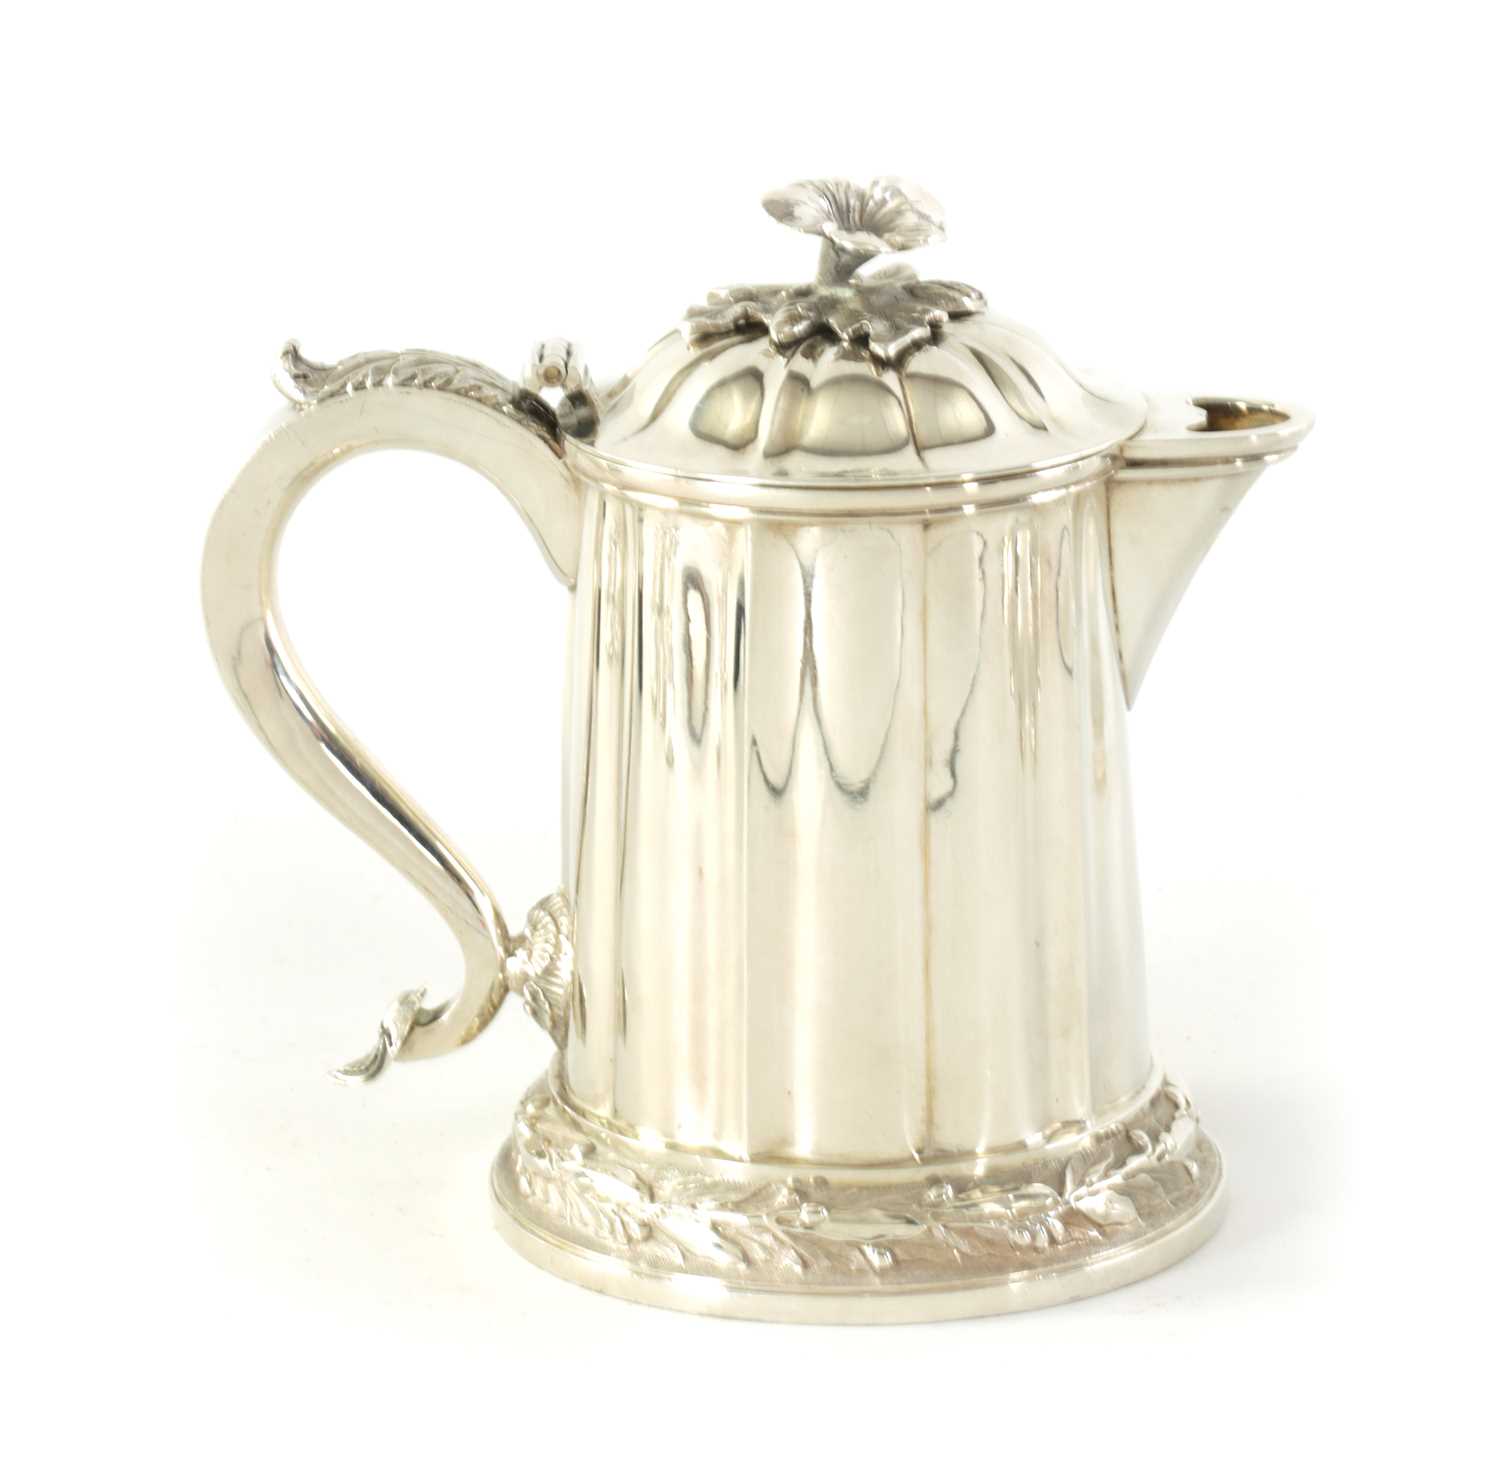 Lot 326 - A MID 19TH CENTURY INDIAN COLONIAL SILVER ALE JUG